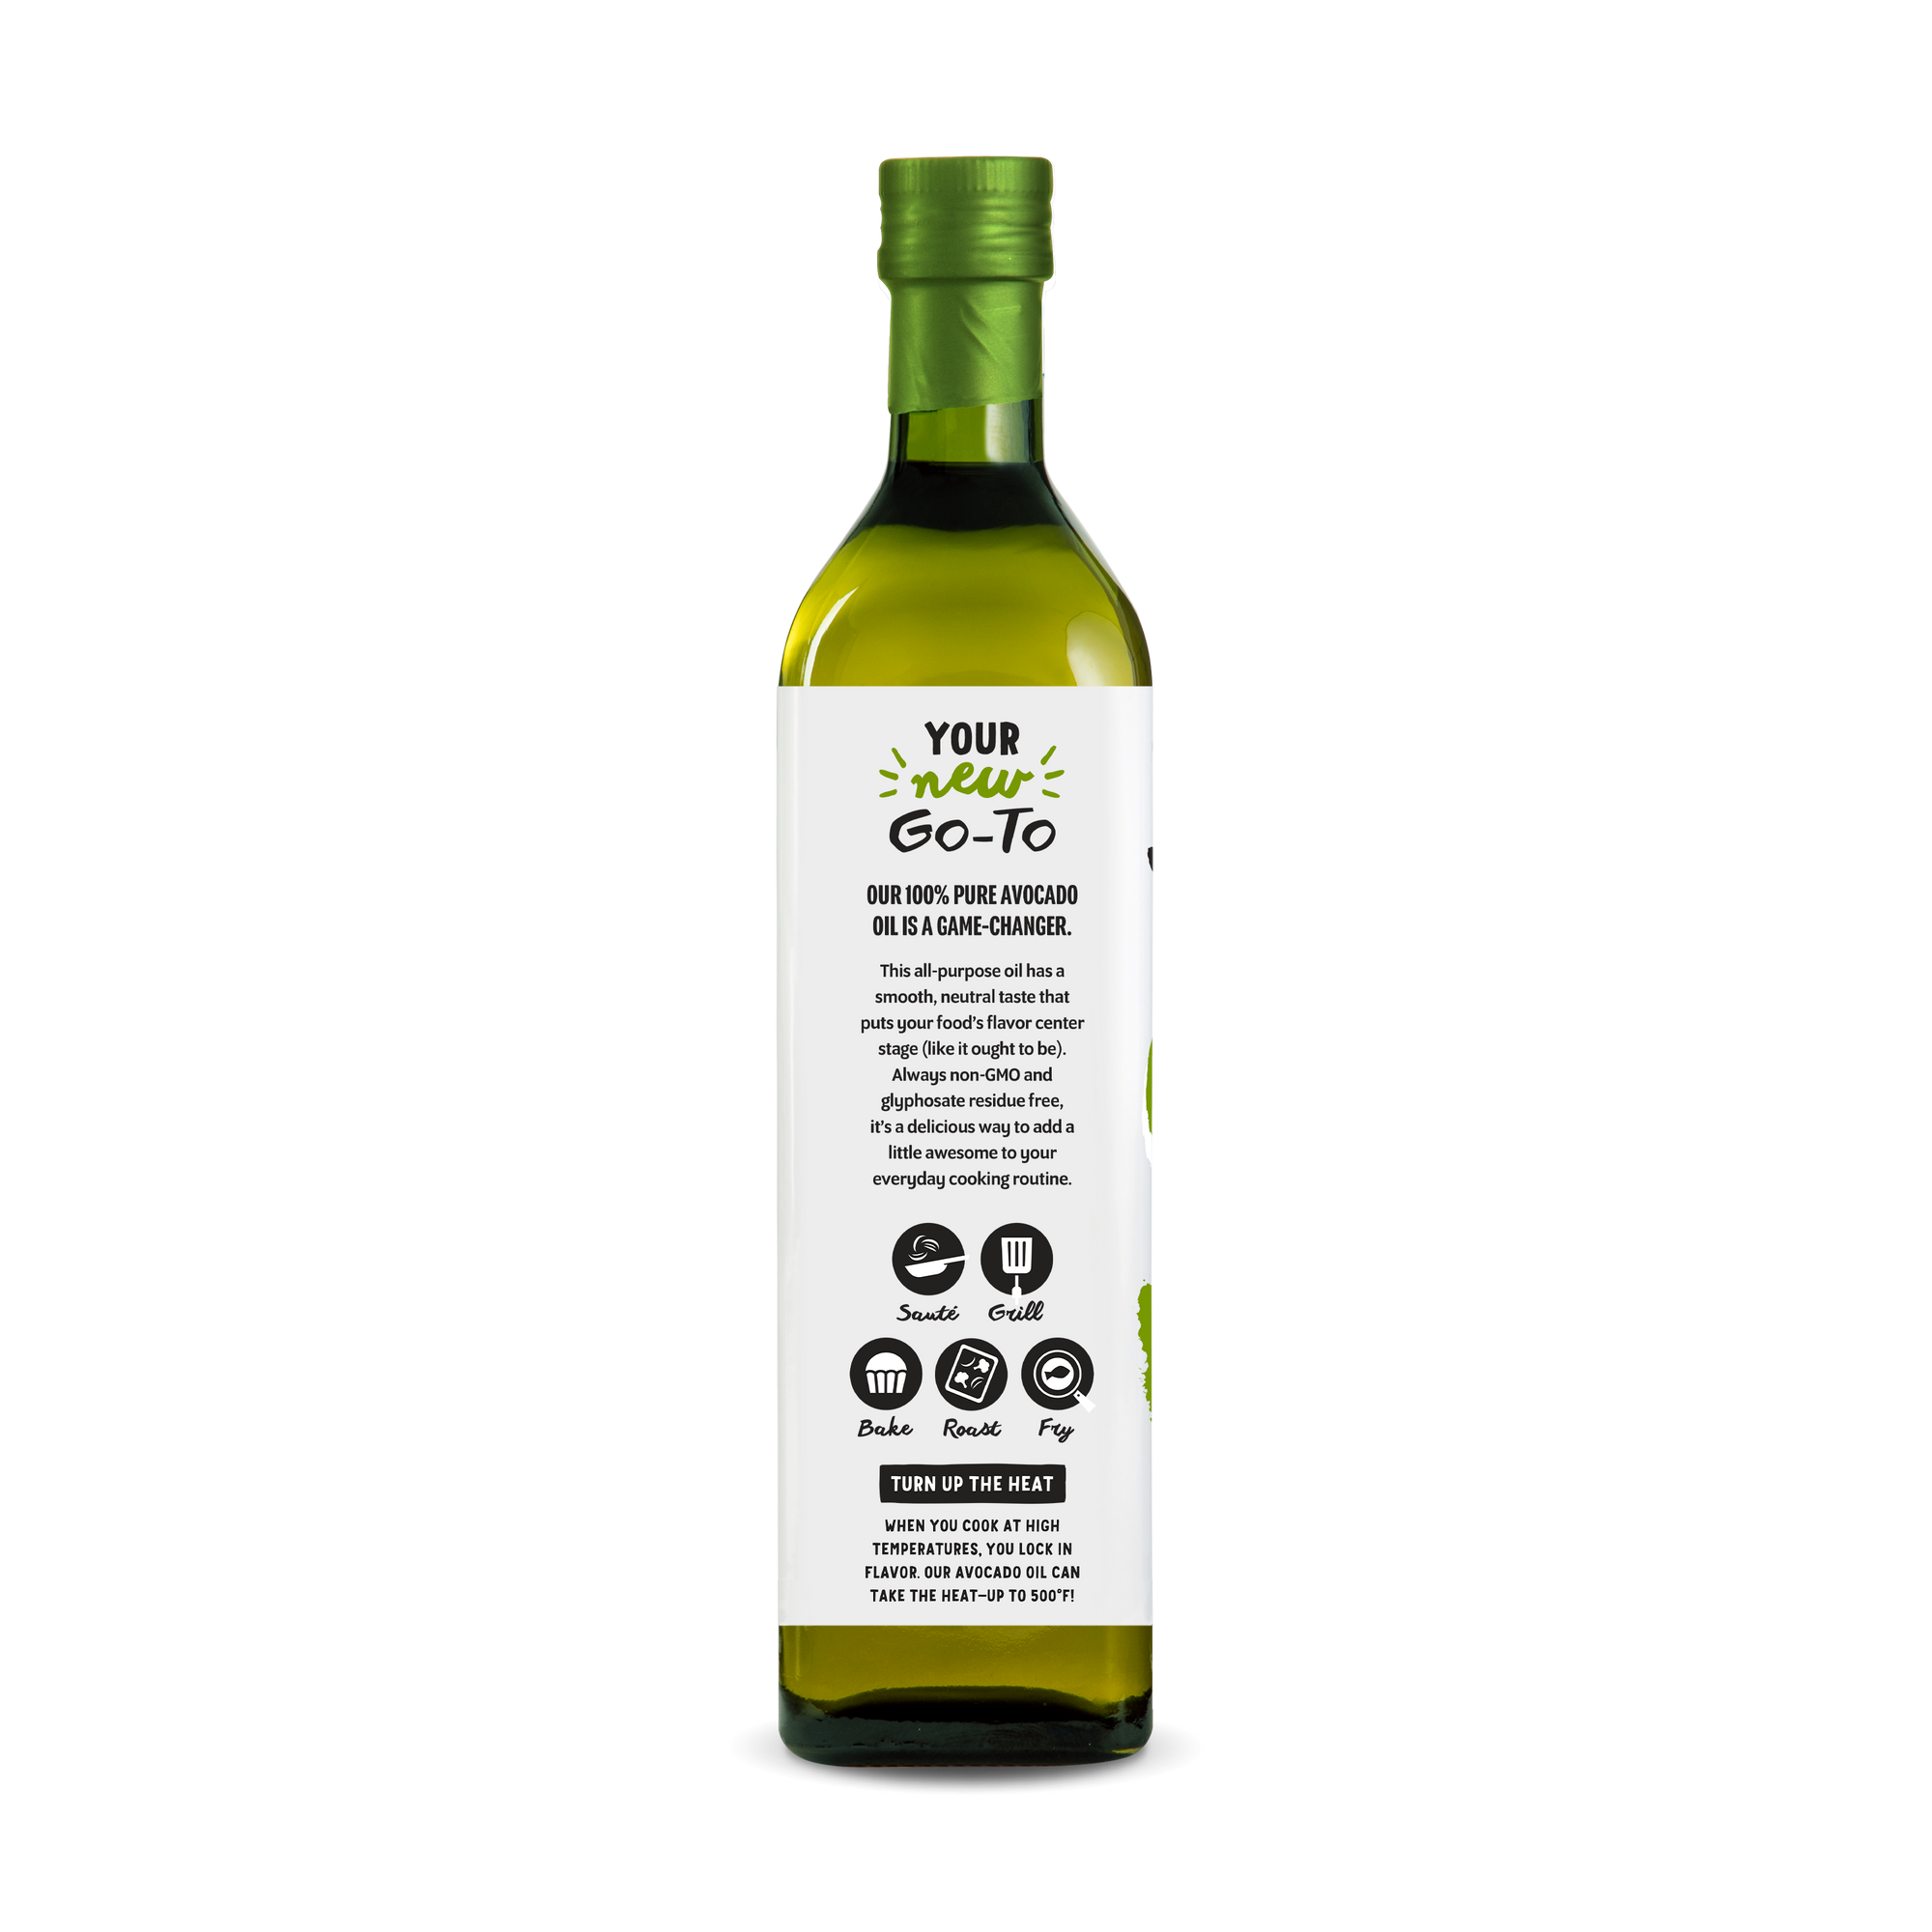 Organic Safflower Oil - Eat Pure Stay Secure